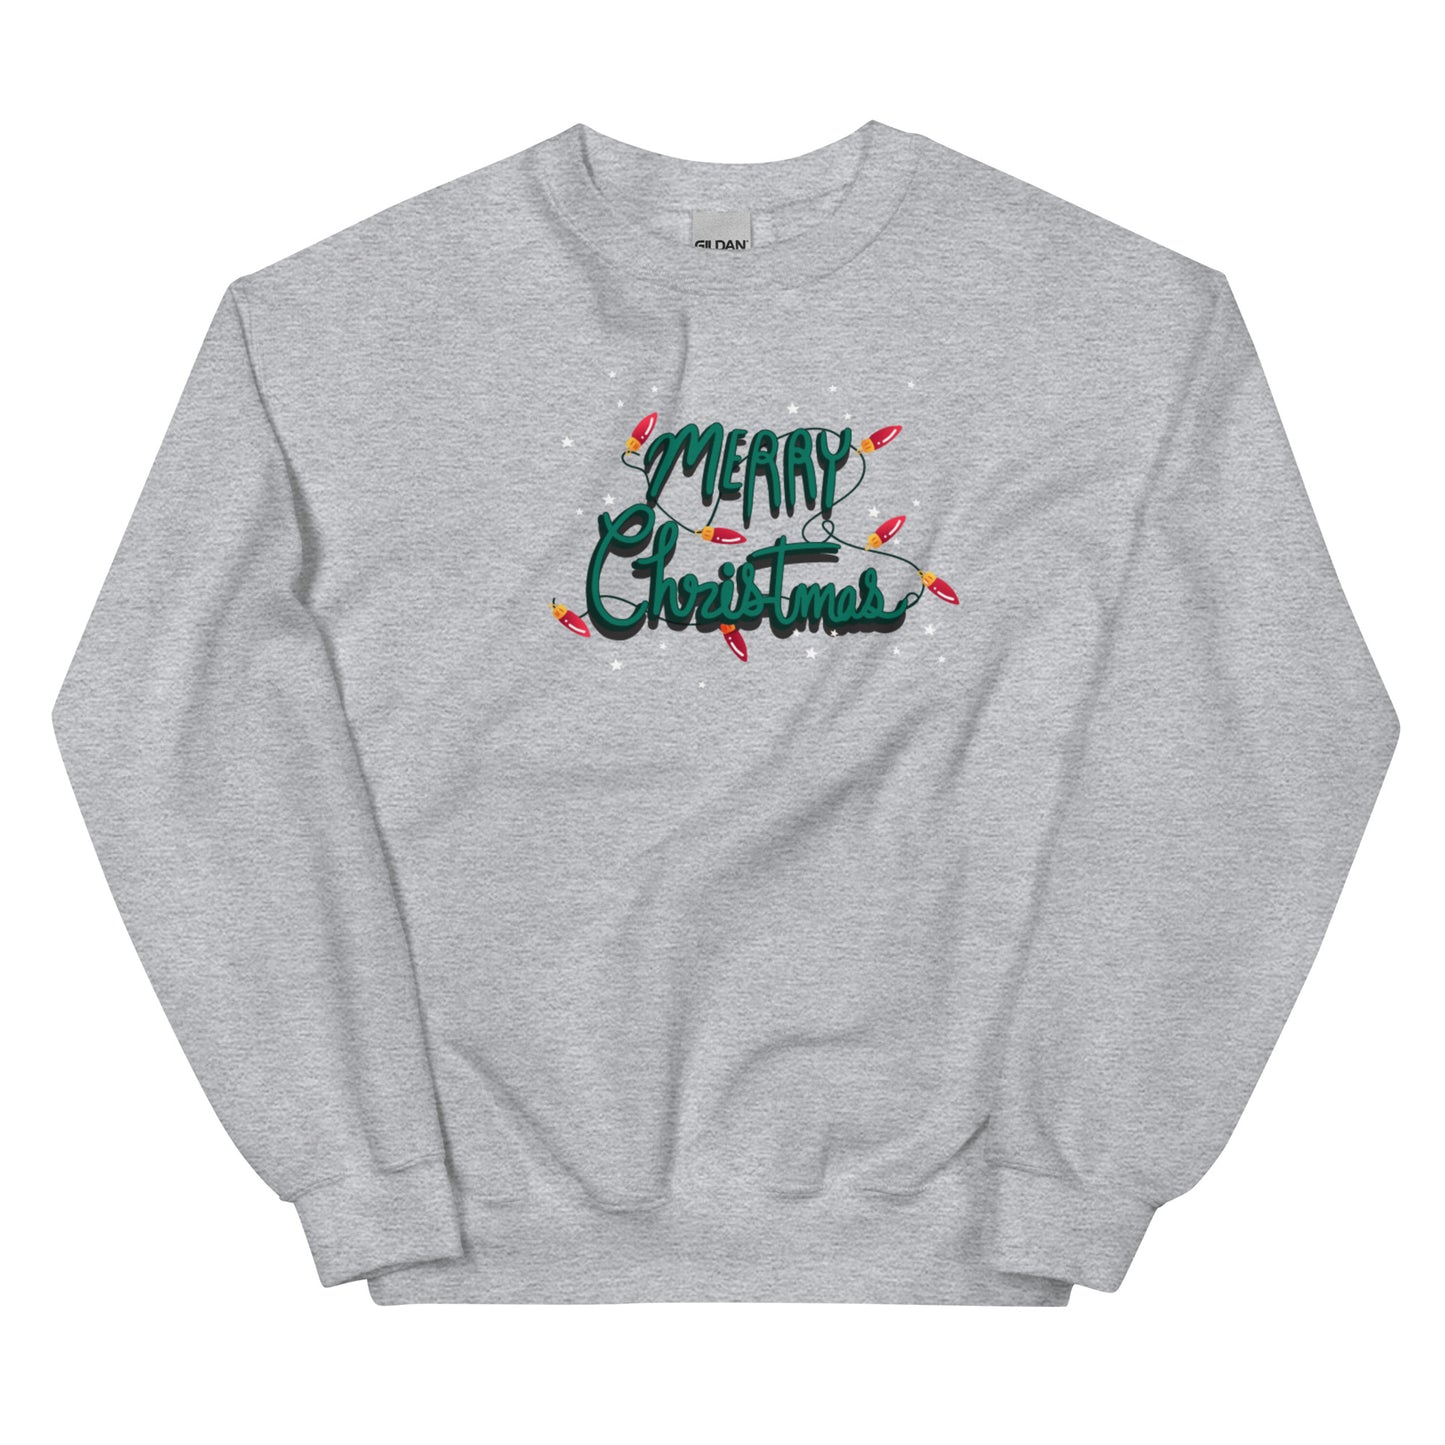 Merry Christmas Unisex Sweatshirt - Spread Holiday Cheer in Style | Festive Comfort, Warmth, and Timeless Elegance